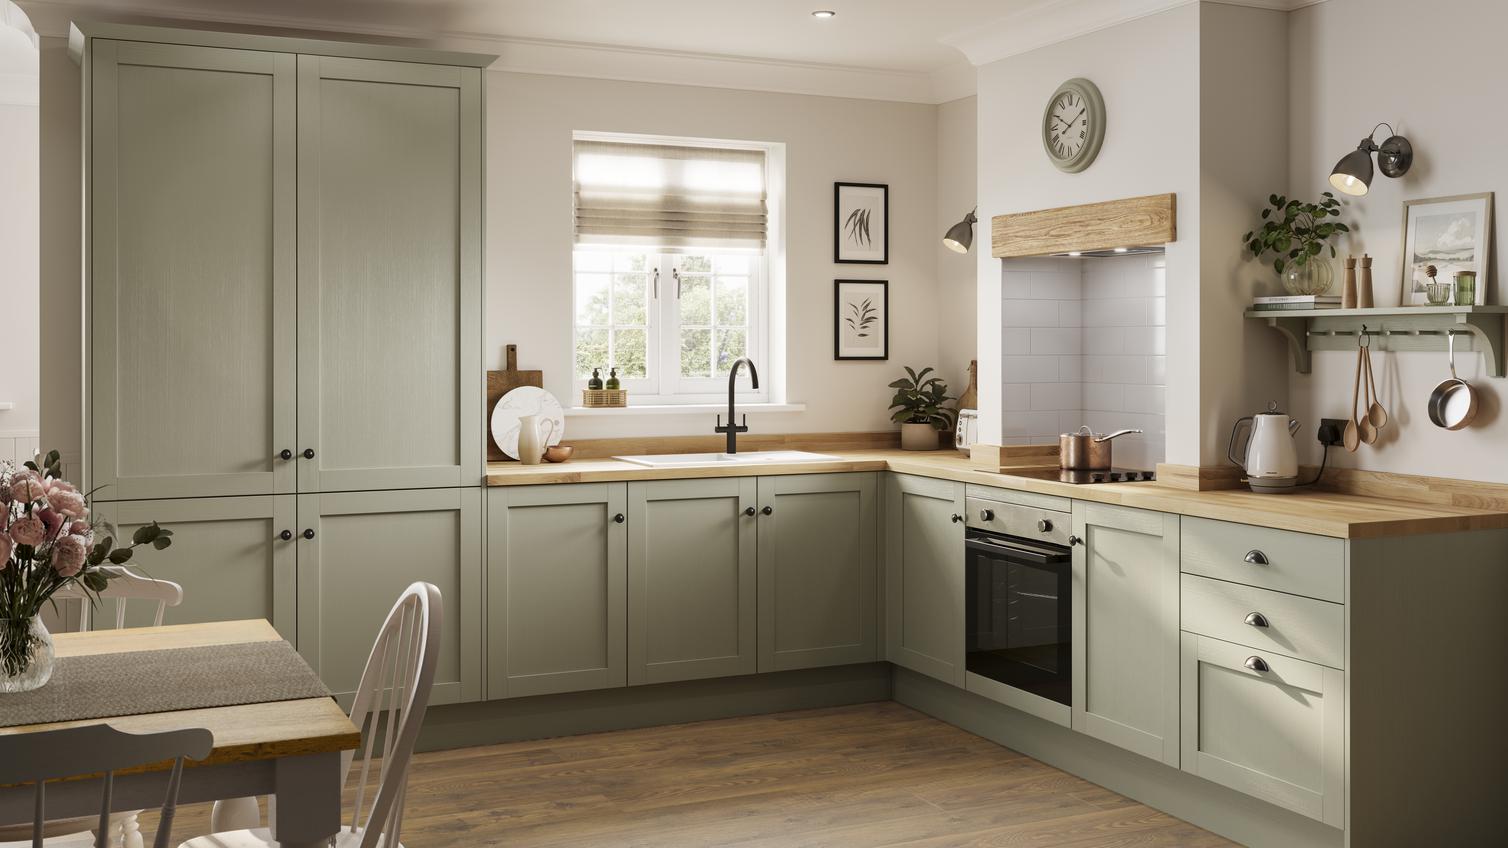 A country kitchen idea featuring sage-green, shaker cupboards in an L-shaped layout with wooden worktops and an electric hob.